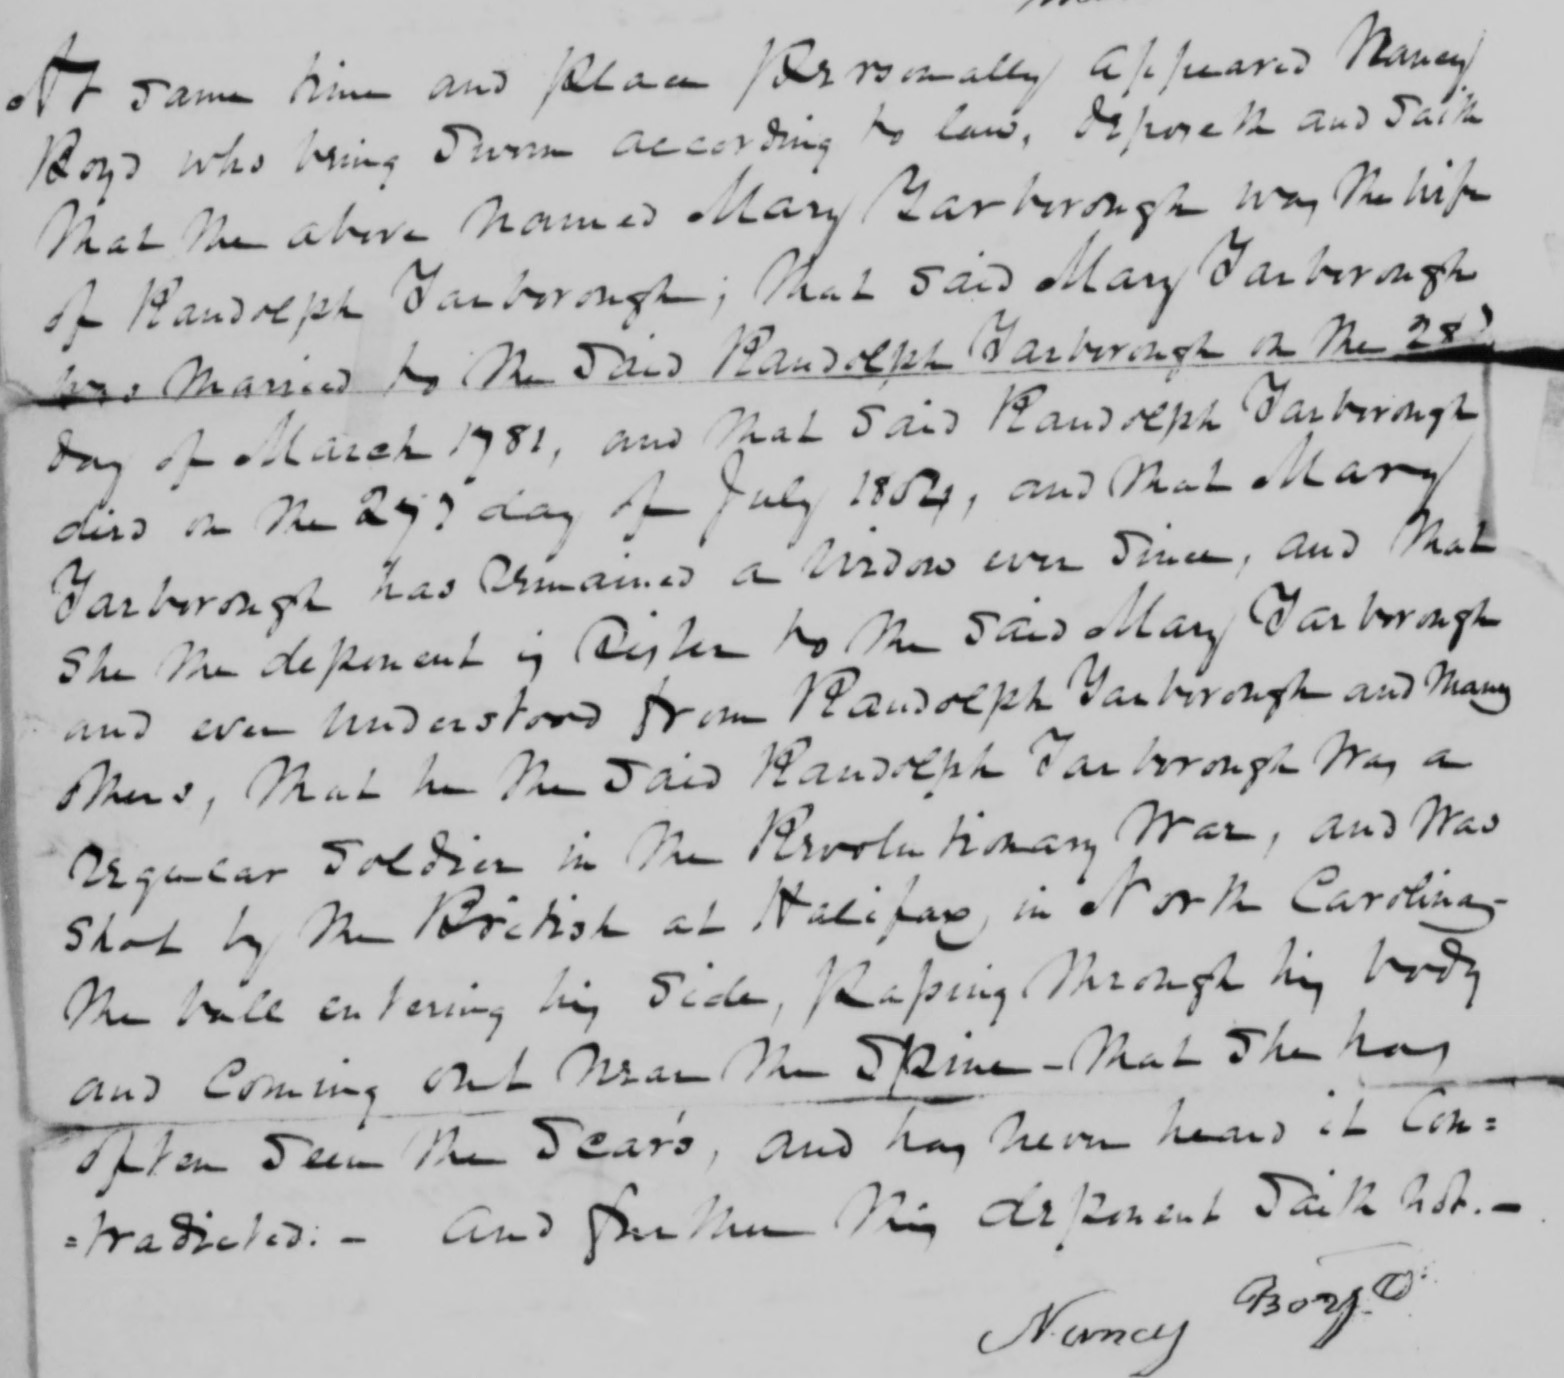 Affidavit of Nancy Boyd in support of a Pension Claim for Mary Yarborough, 8 July 1839